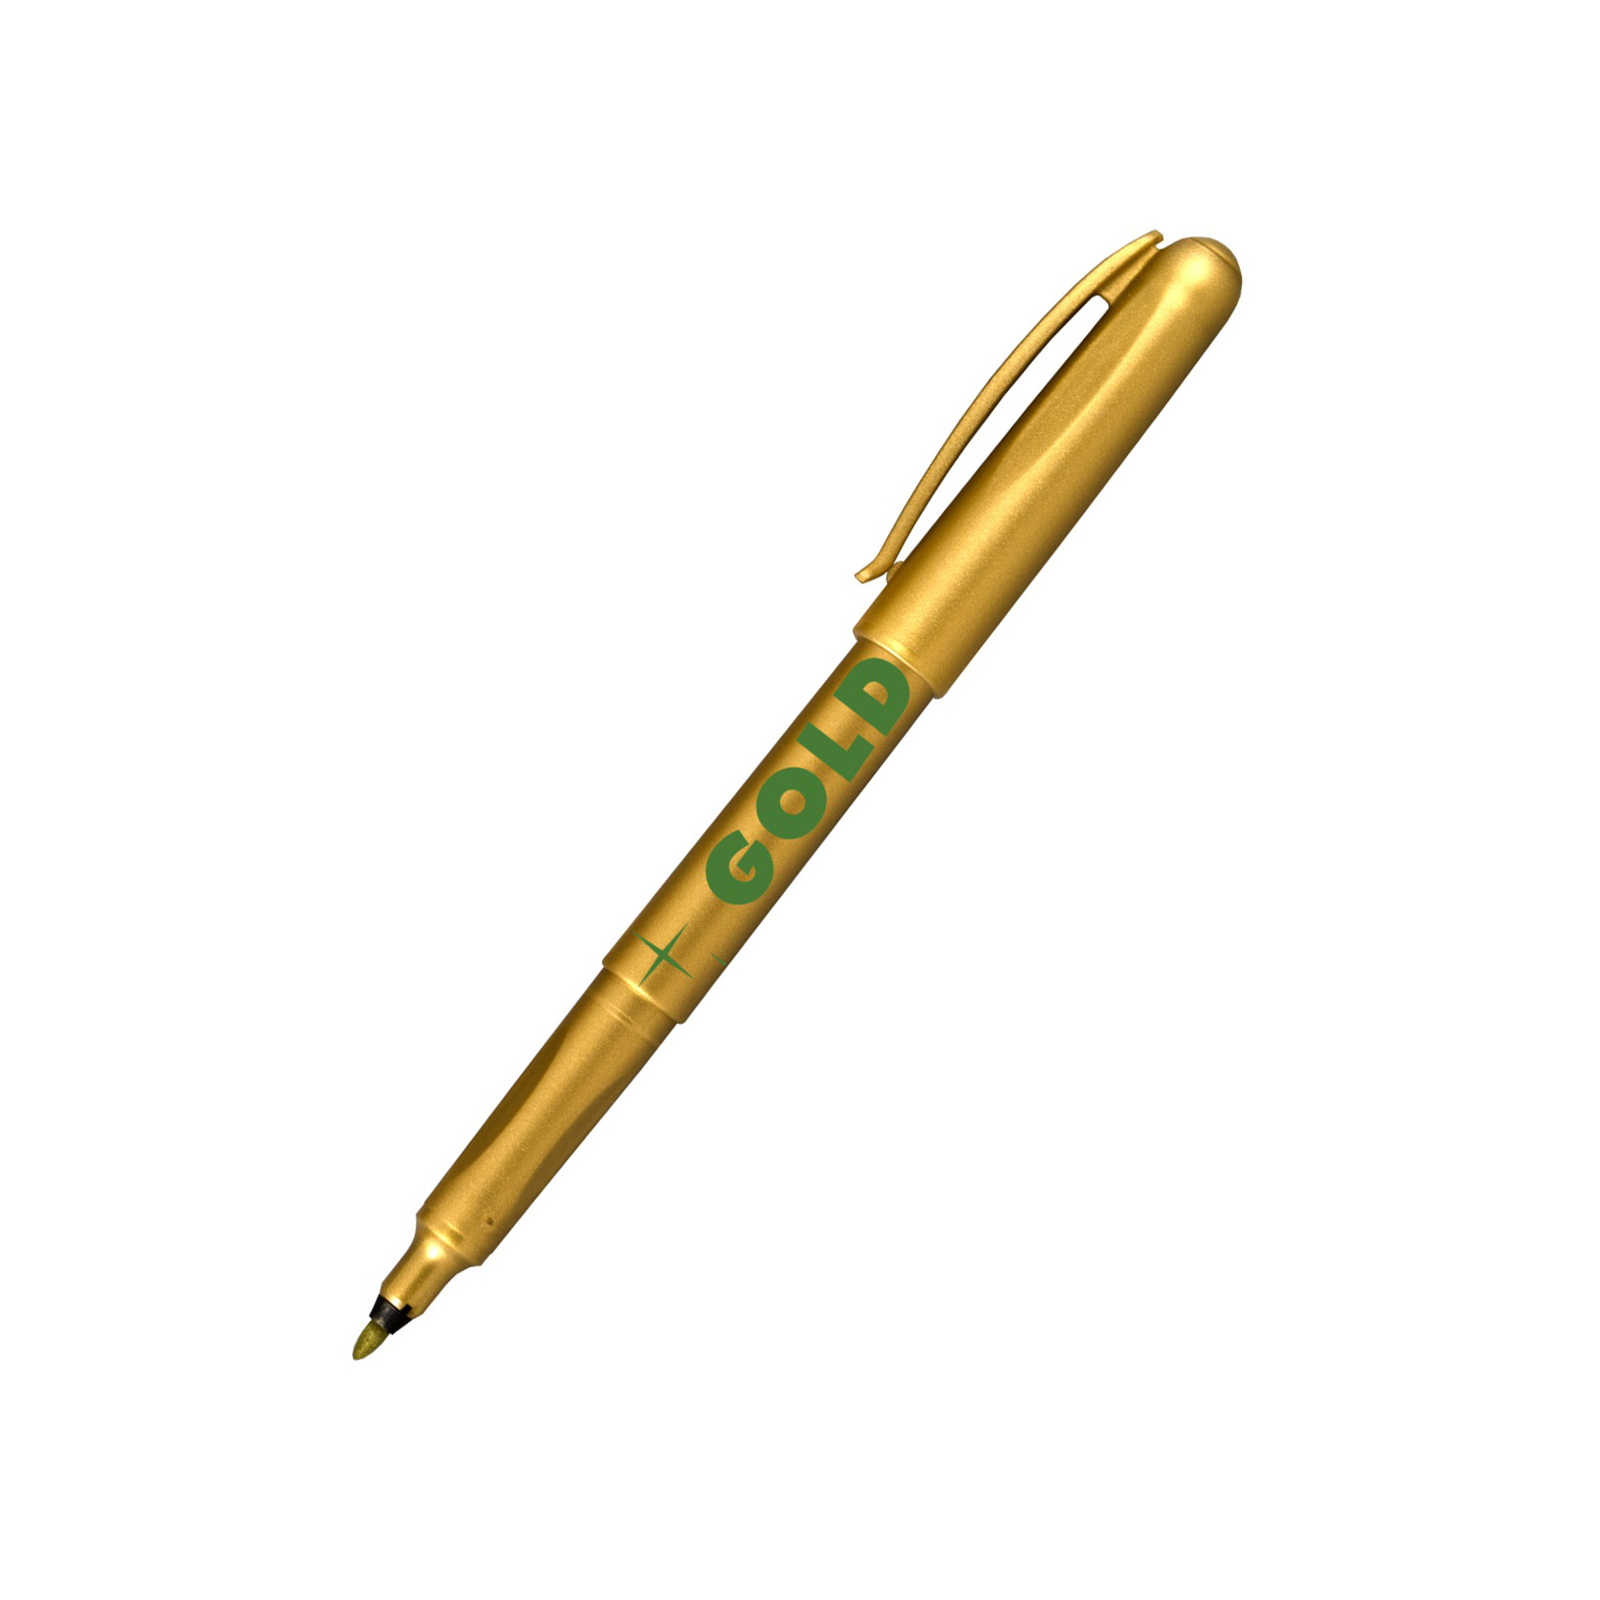 Маркер Centropen GOLD & SILVER 2670 M 1 мм, Gold color (2670/12)